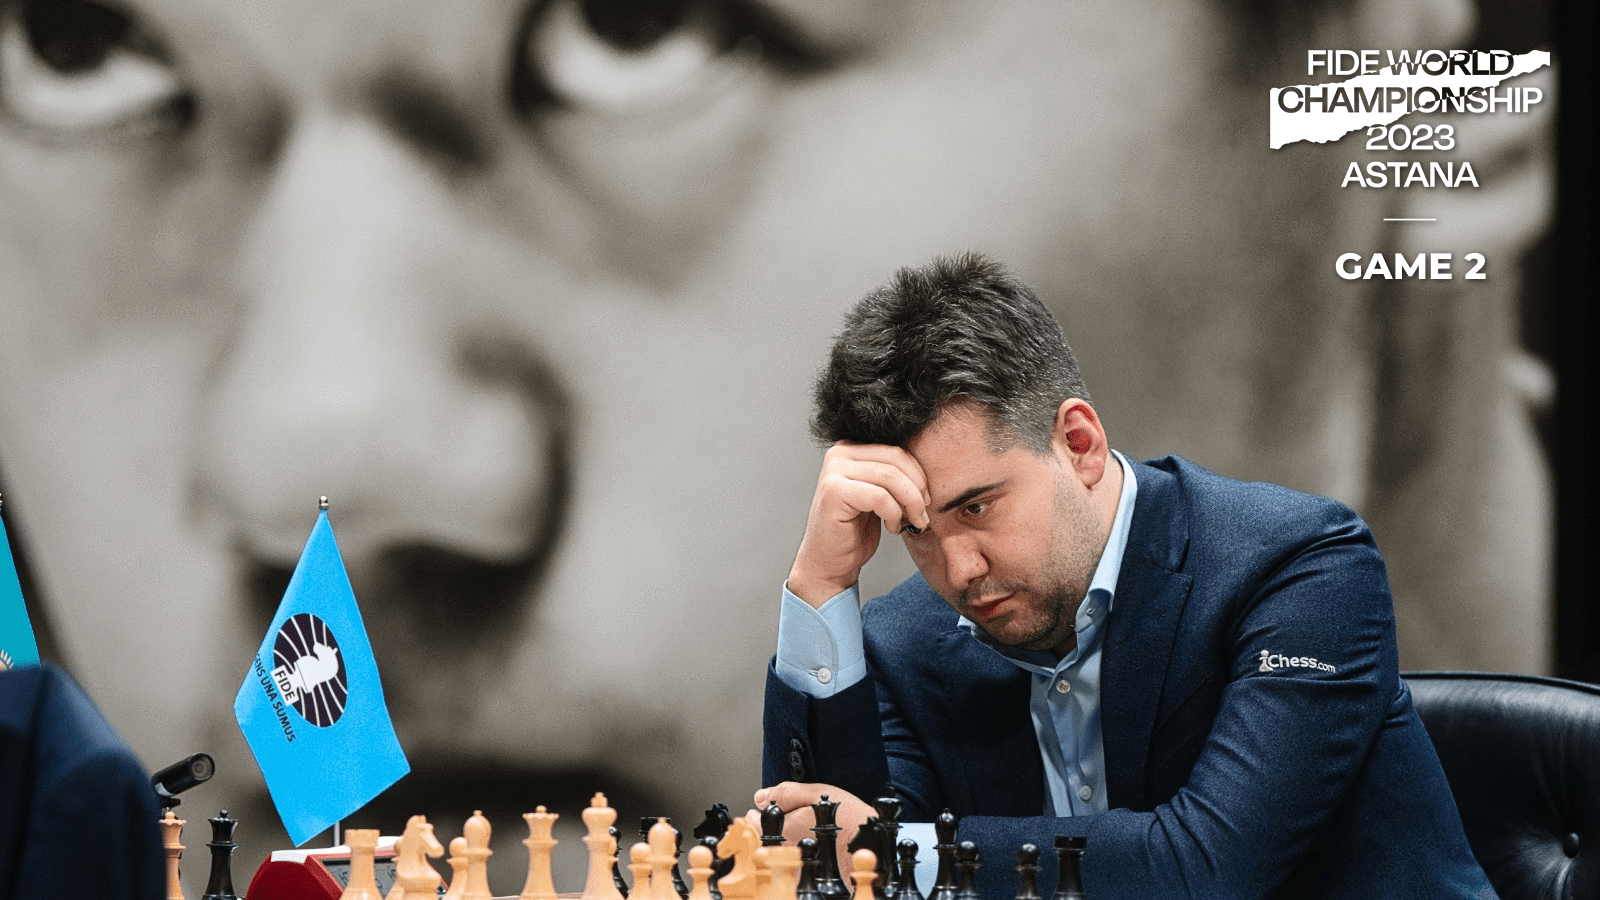 The chess games of Richard Rapport